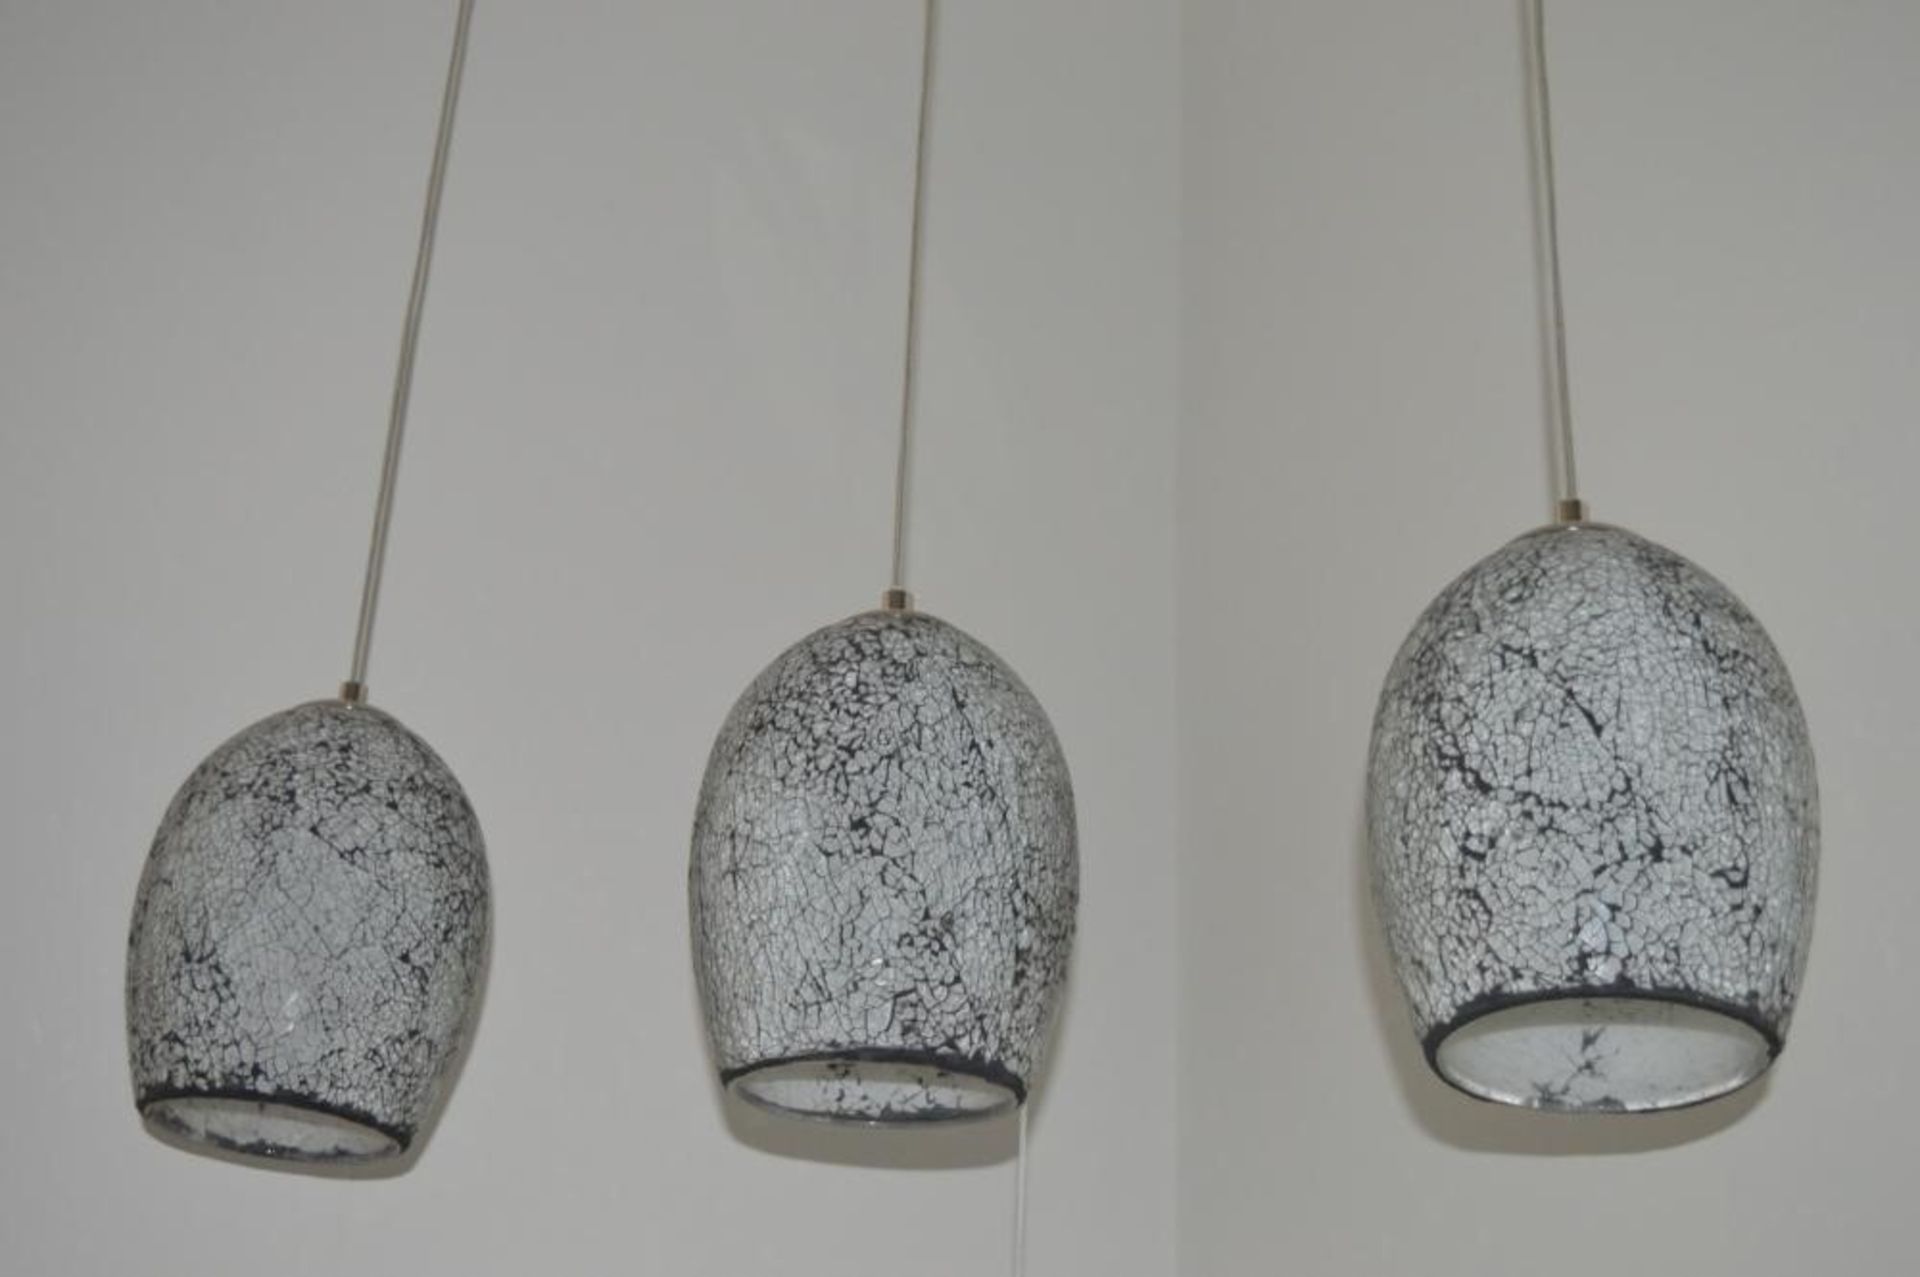 1 x Crackle White Mosaic Glass 3 Light Fitting With Dome Shades and Satin Silver Trim - Ex Display S - Image 3 of 5